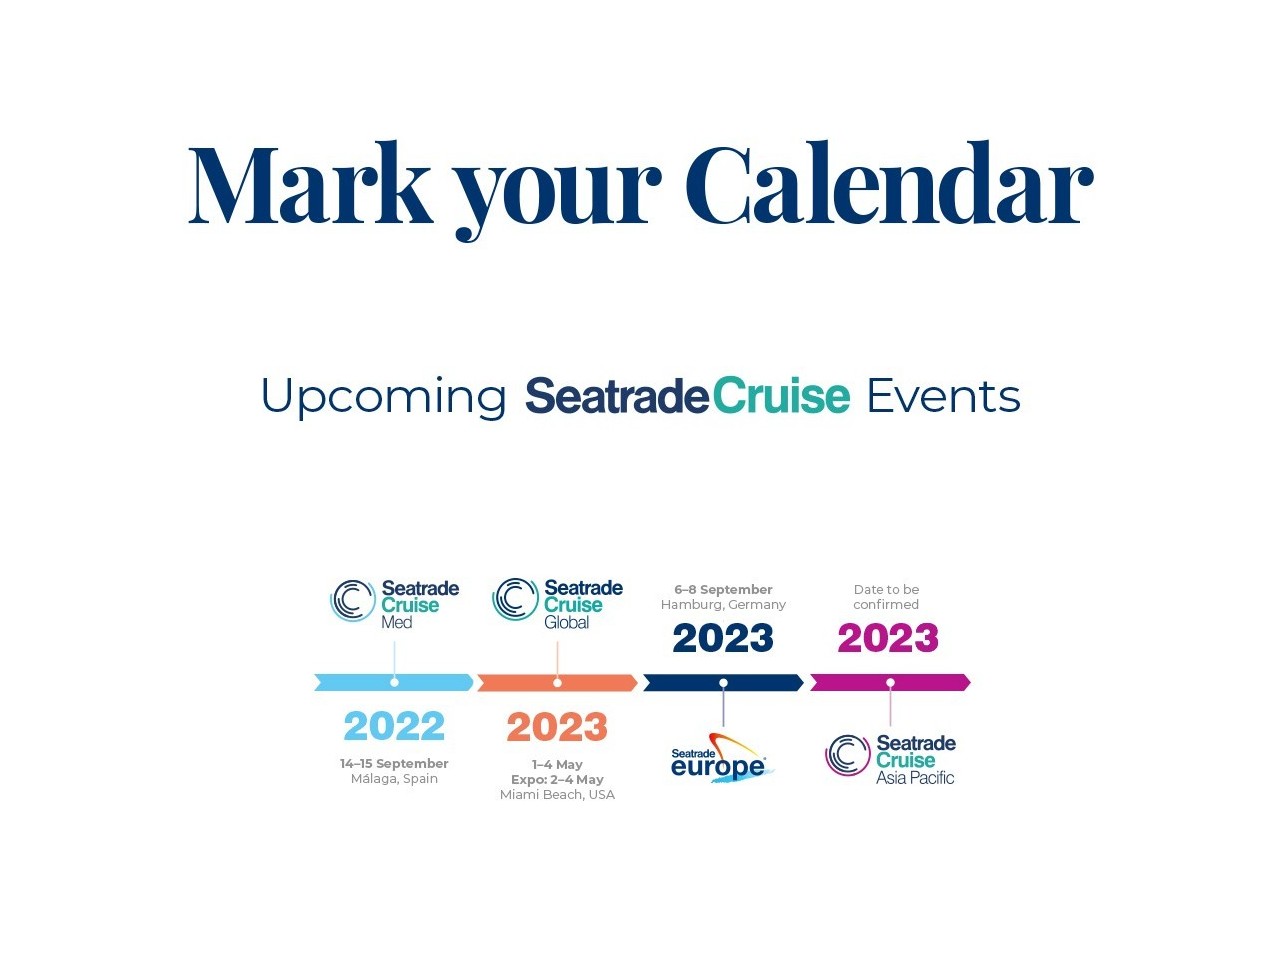 Upcoming Seatrade Cruise events